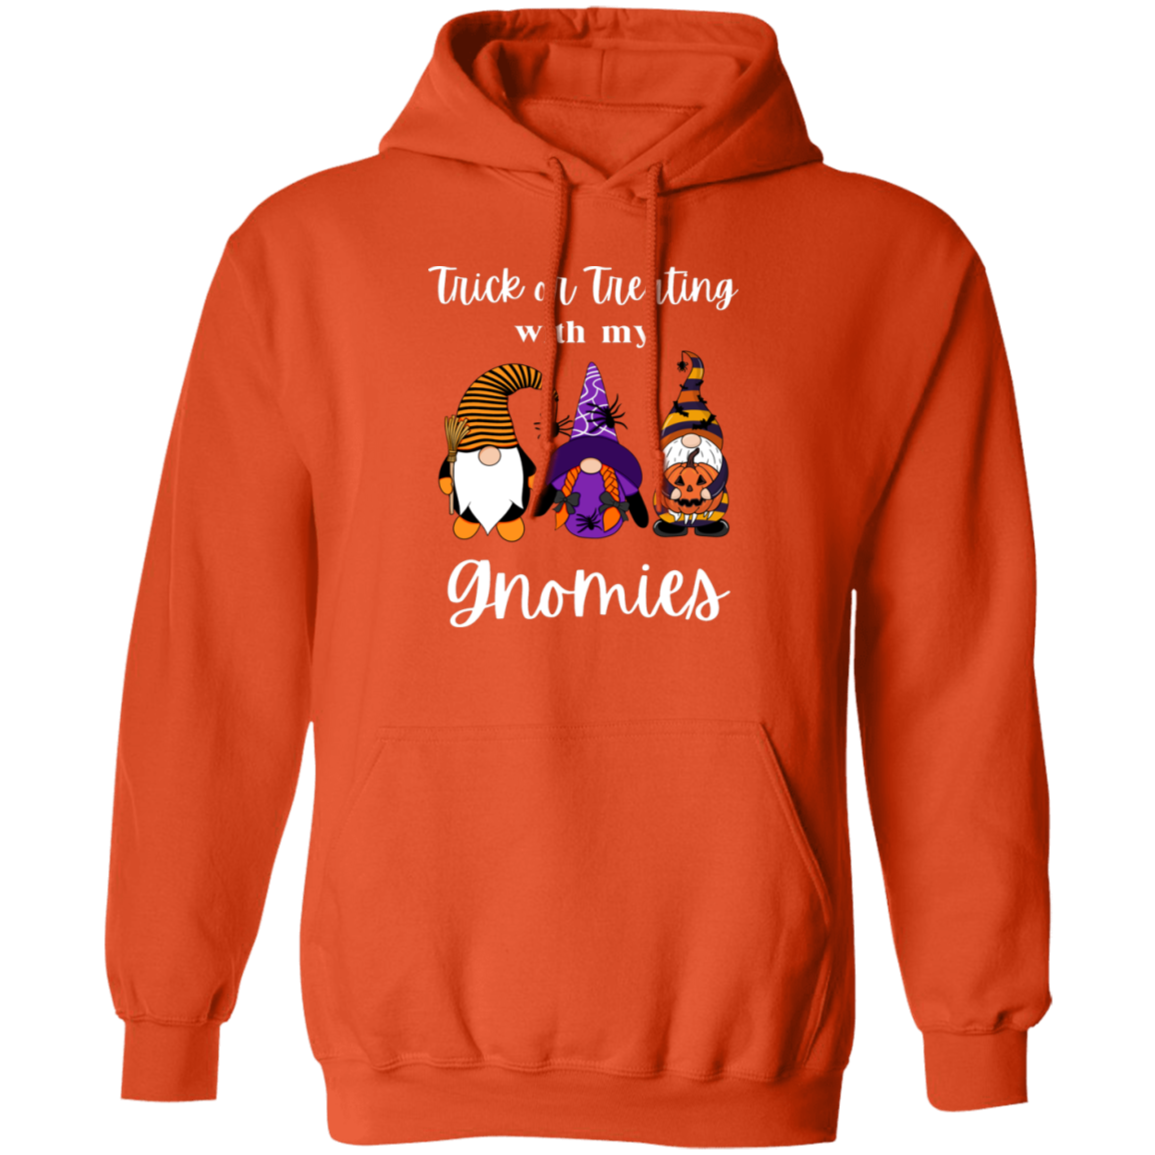 TRICK OR TREATING WITH MY GNOMIES UnisexPullover Hoodie